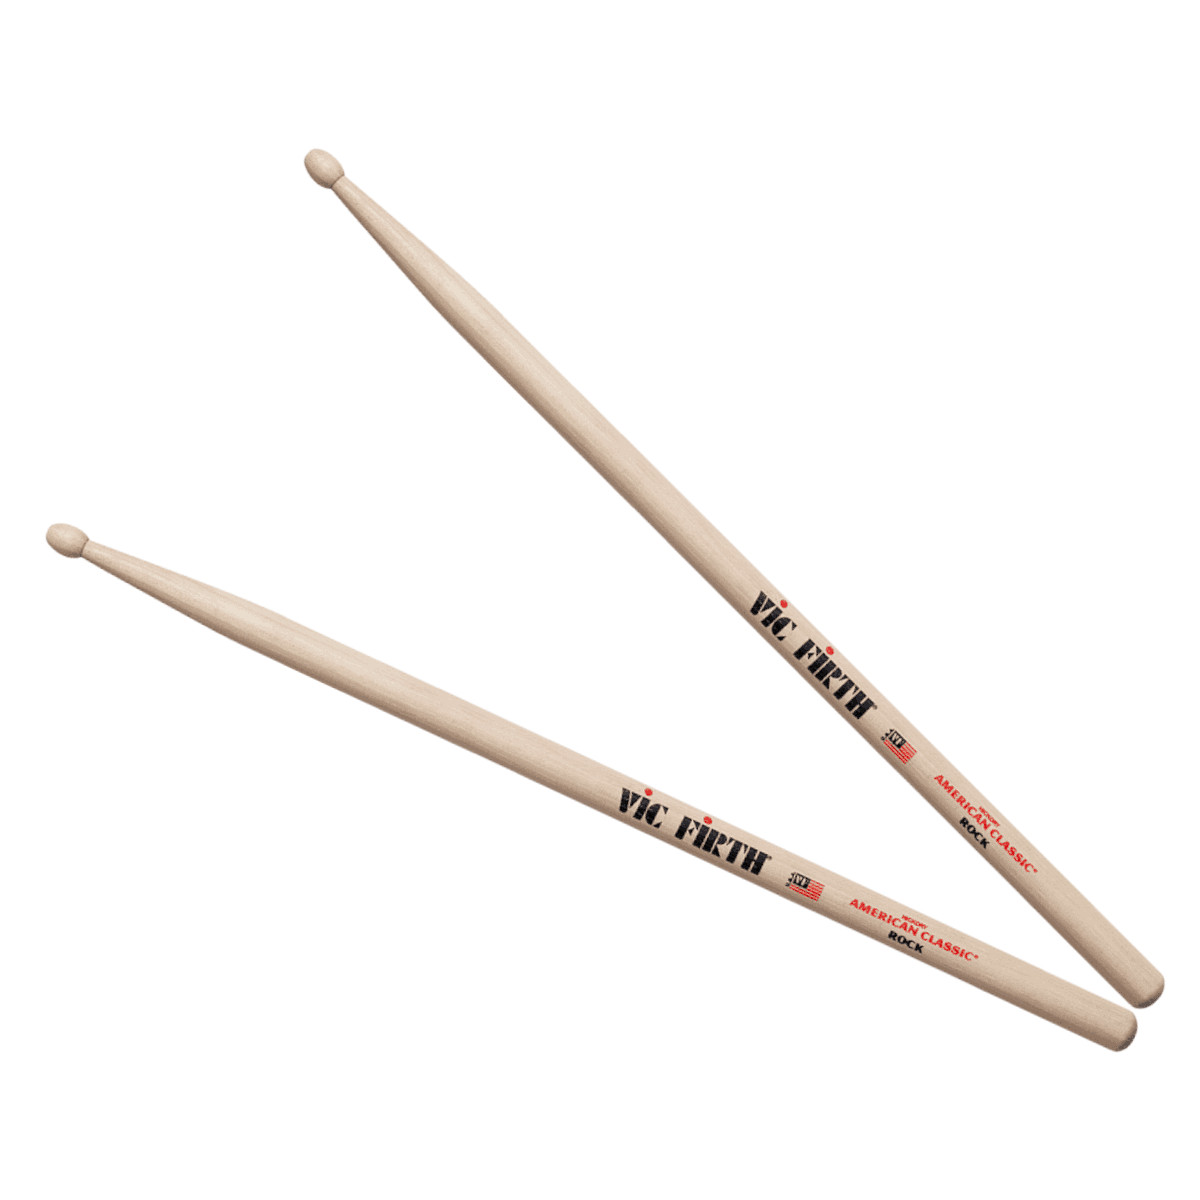 VIC FIRTH ROCK - AMERICAN CLASSIC HICKORY